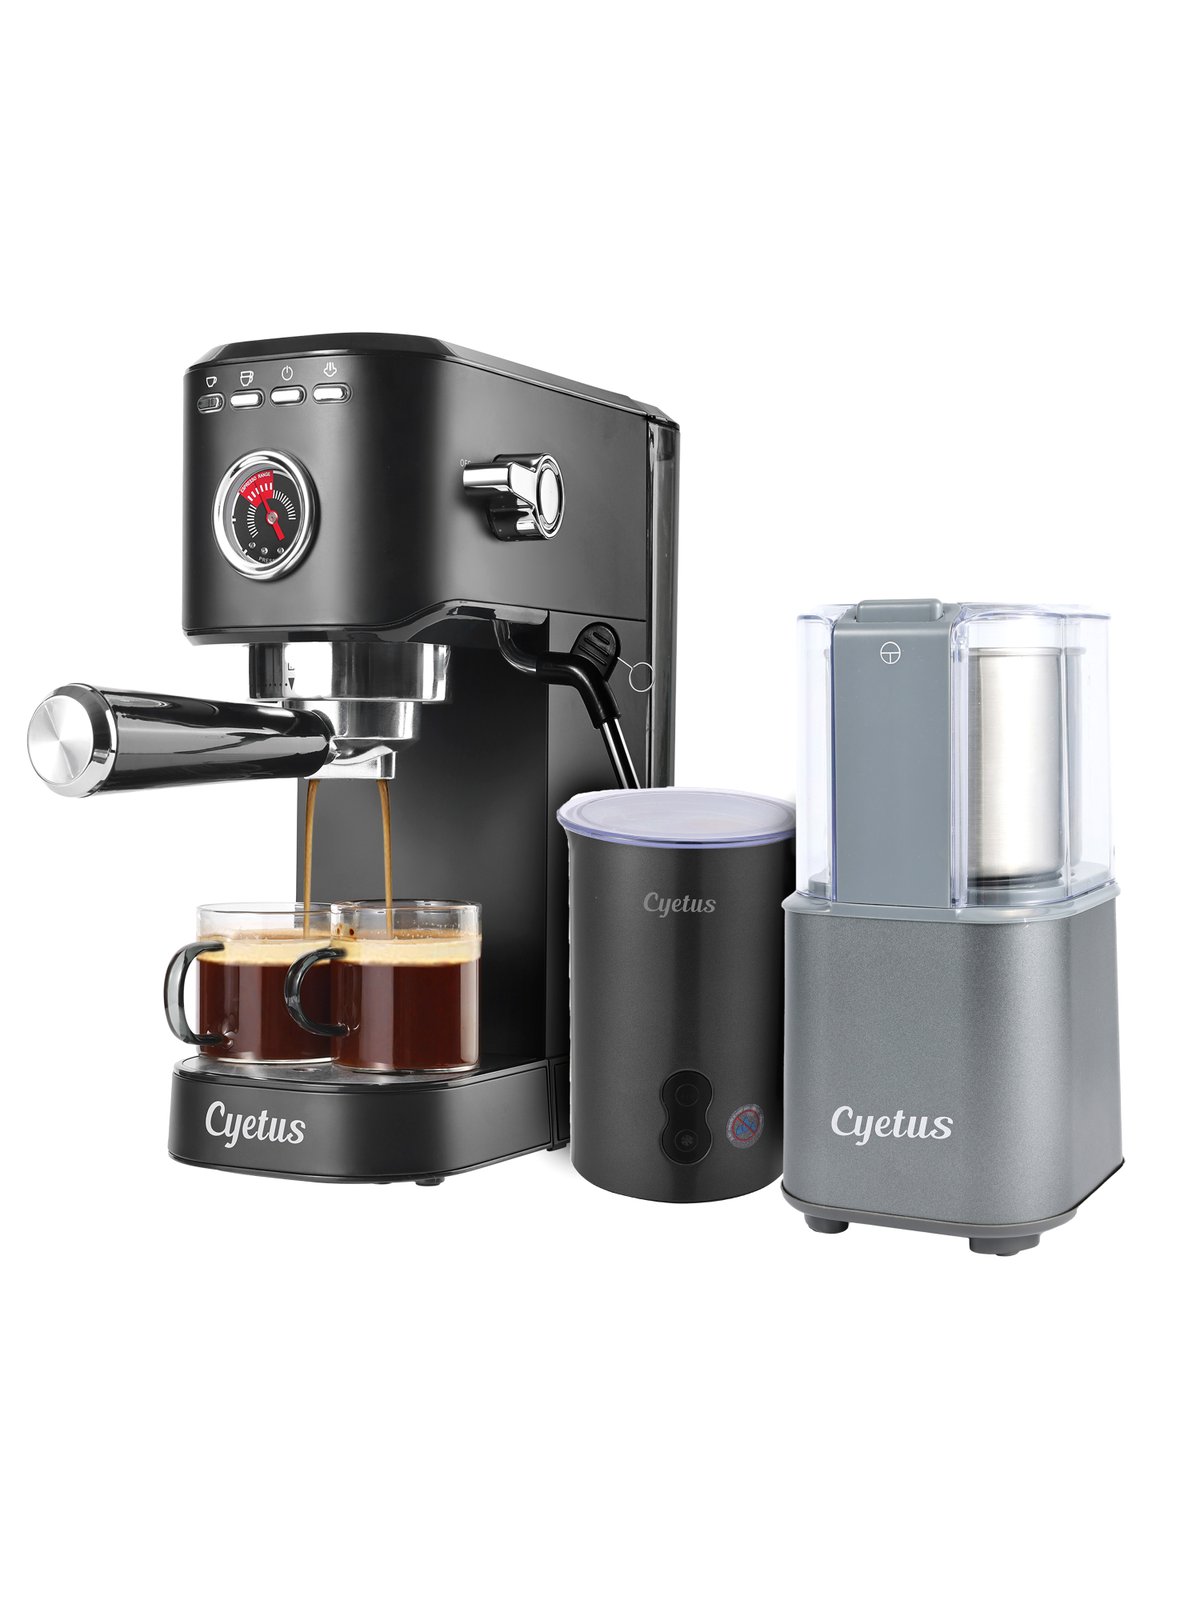 https://images.verishop.com/cyetus-black-espresso-machine-with-milk-steam-frother-wand-electric-coffee-bean-grinder-and-4-in-1-automatic-milk-frother-steamer/M00679283562668-4082721071?auto=format&cs=strip&fit=max&w=1200